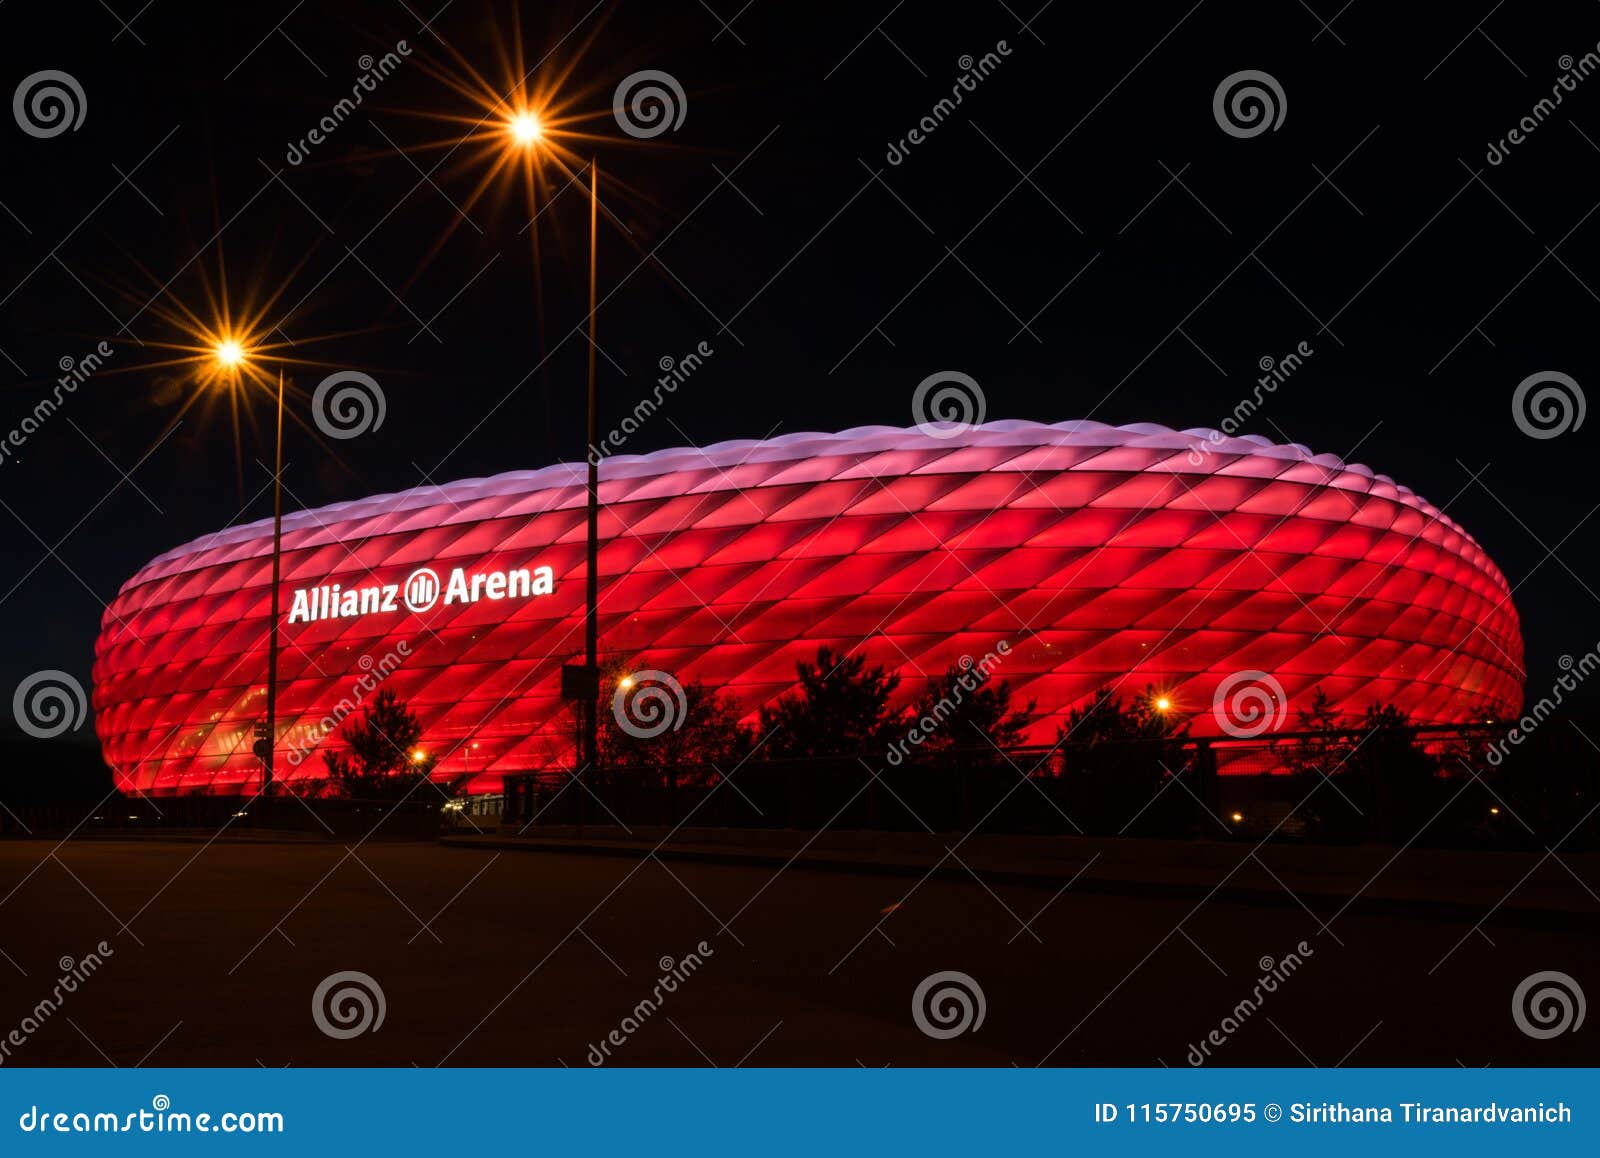 Allianz Arena, the Football Stadium of FC Bayern, Illuminated in Red at ...